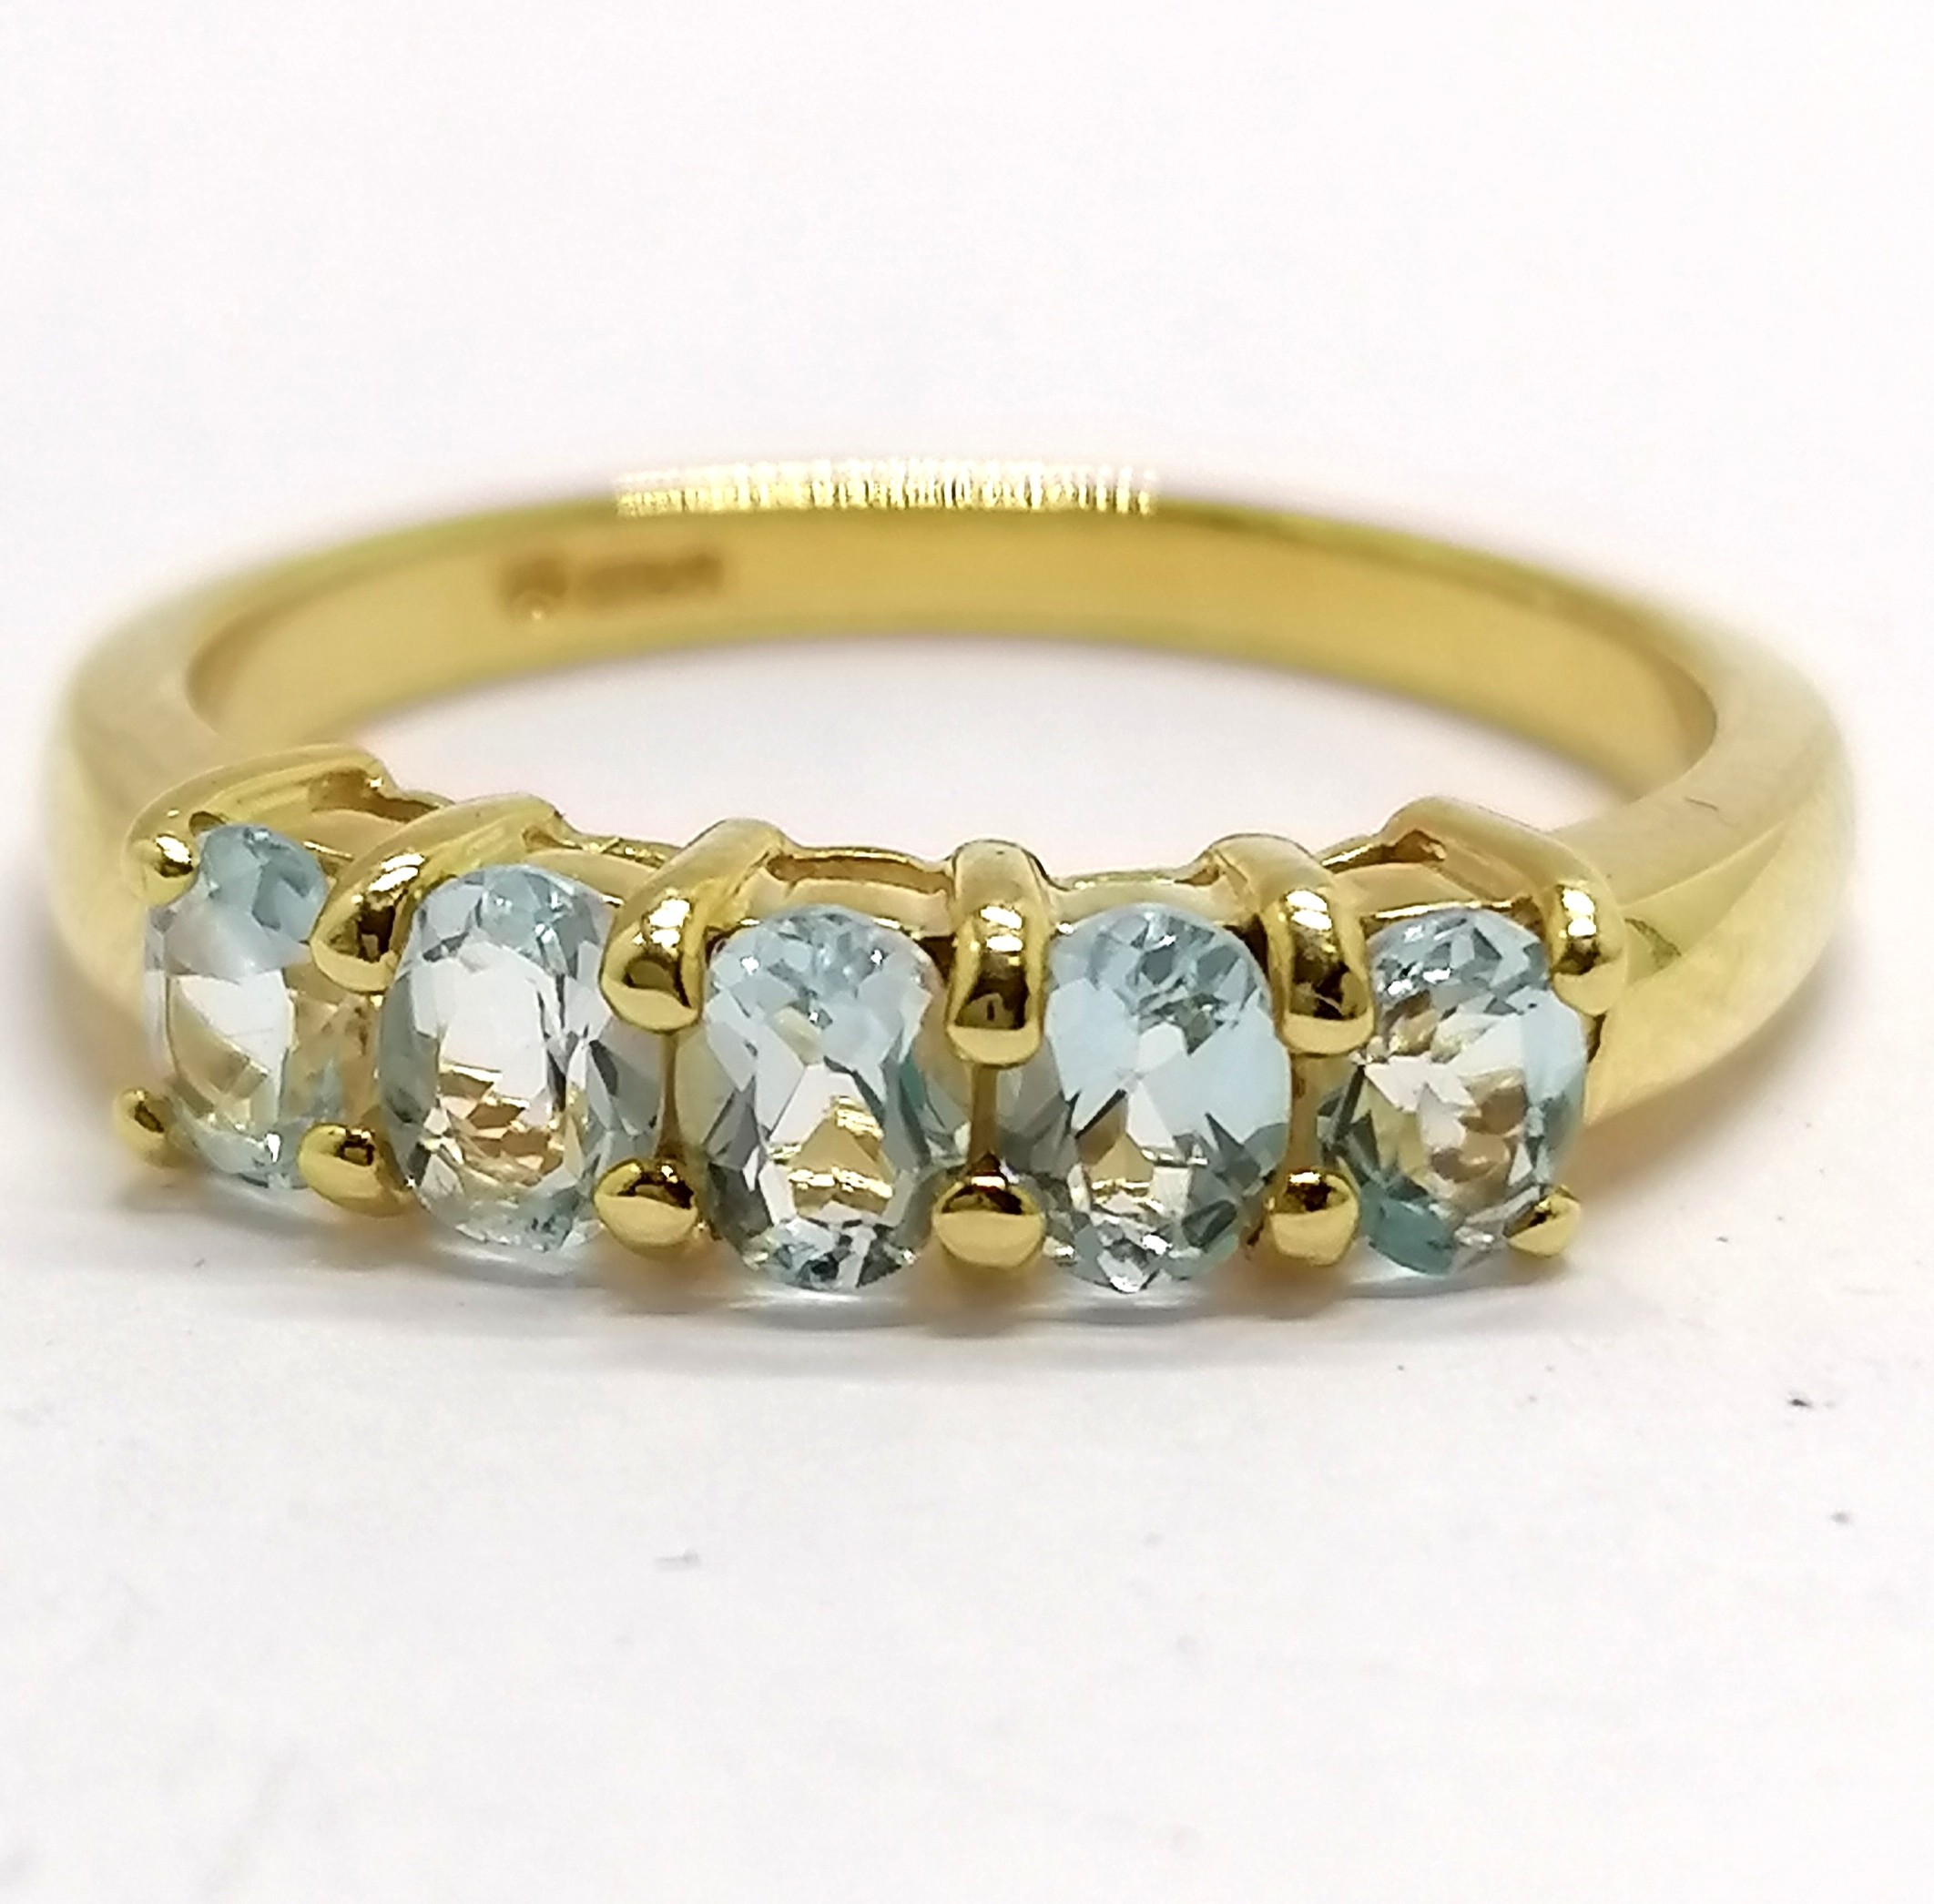 9ct hallmarked gold 5 stone blue topaz ring - size P½ & 3g total weight